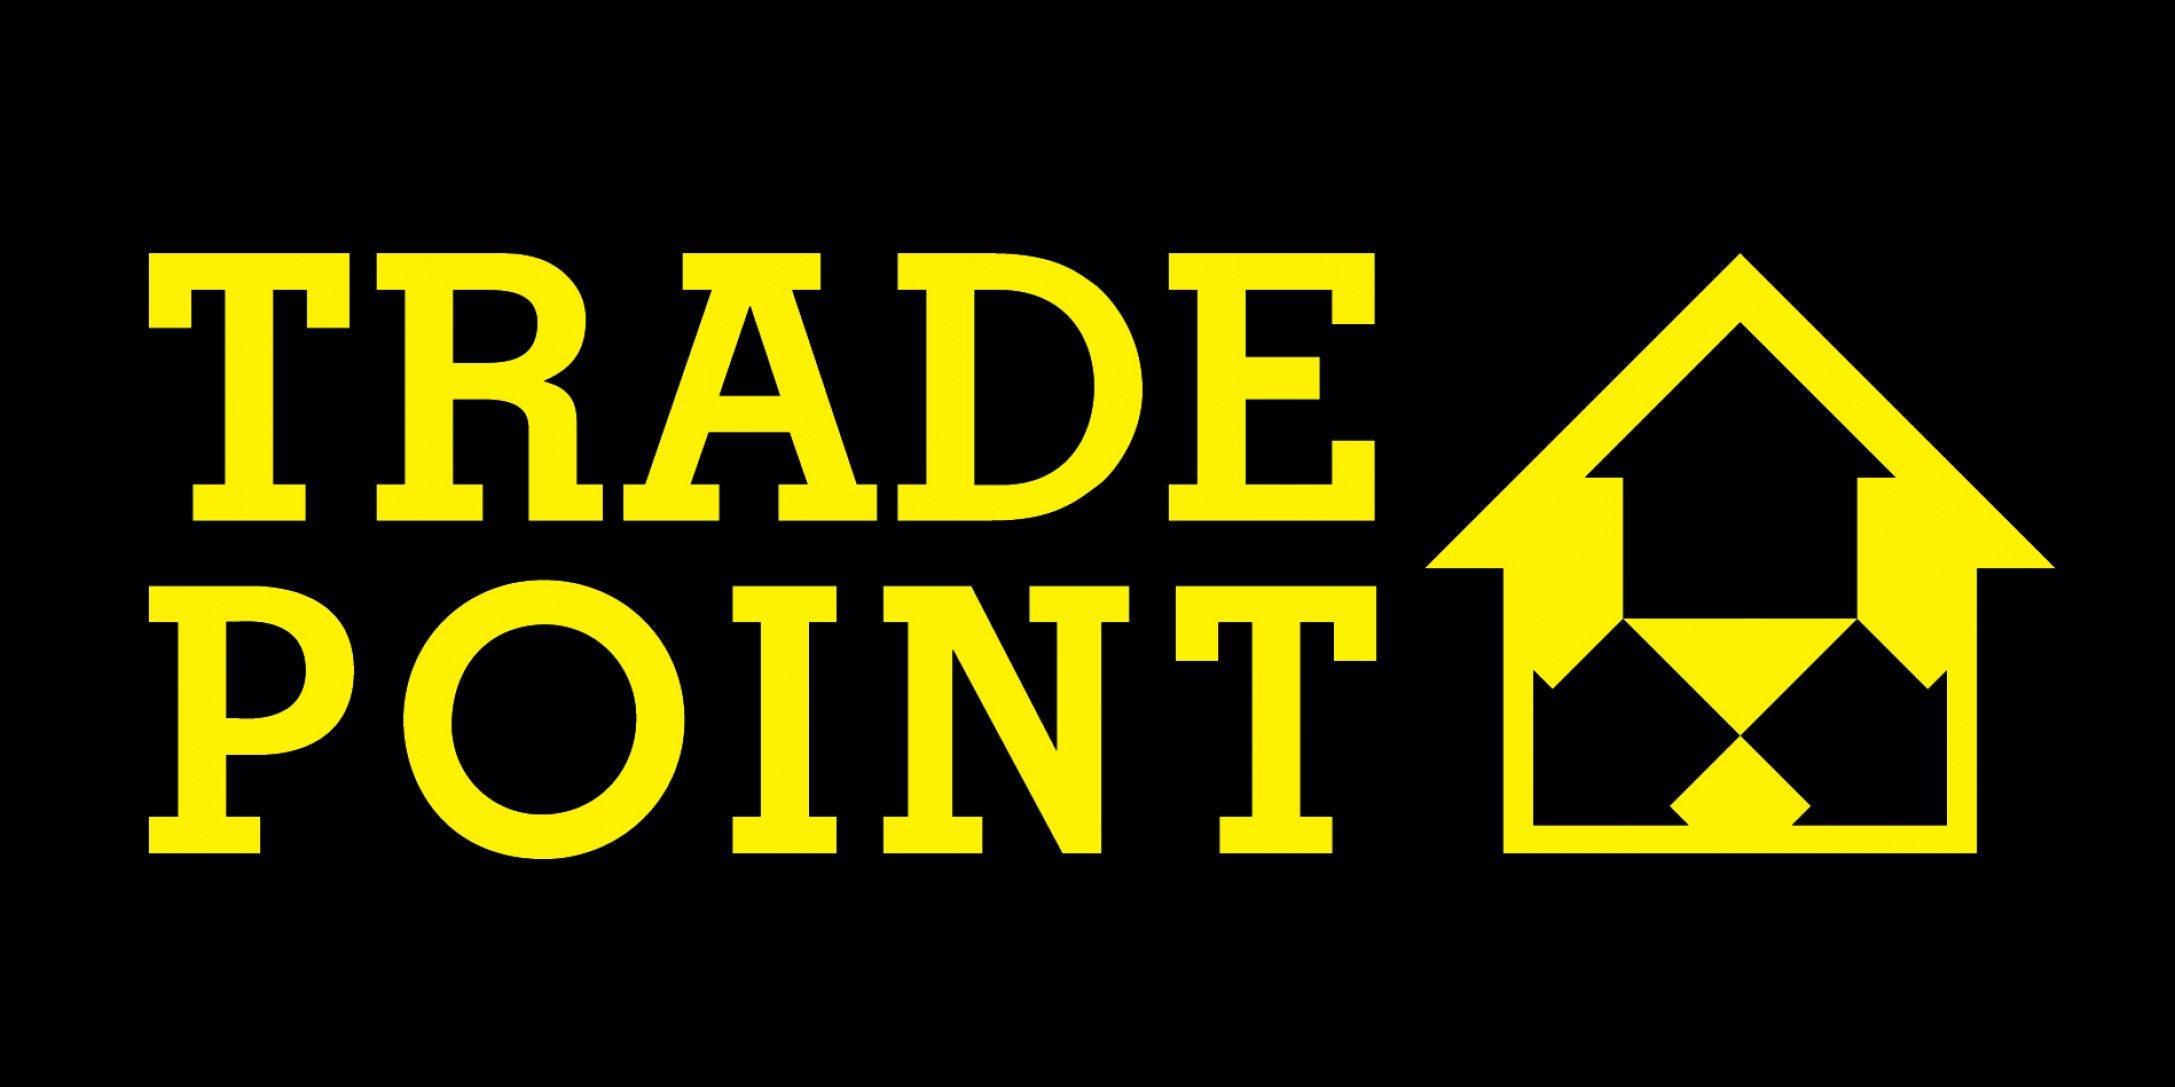 Tradepoint Coupons & Promo Codes